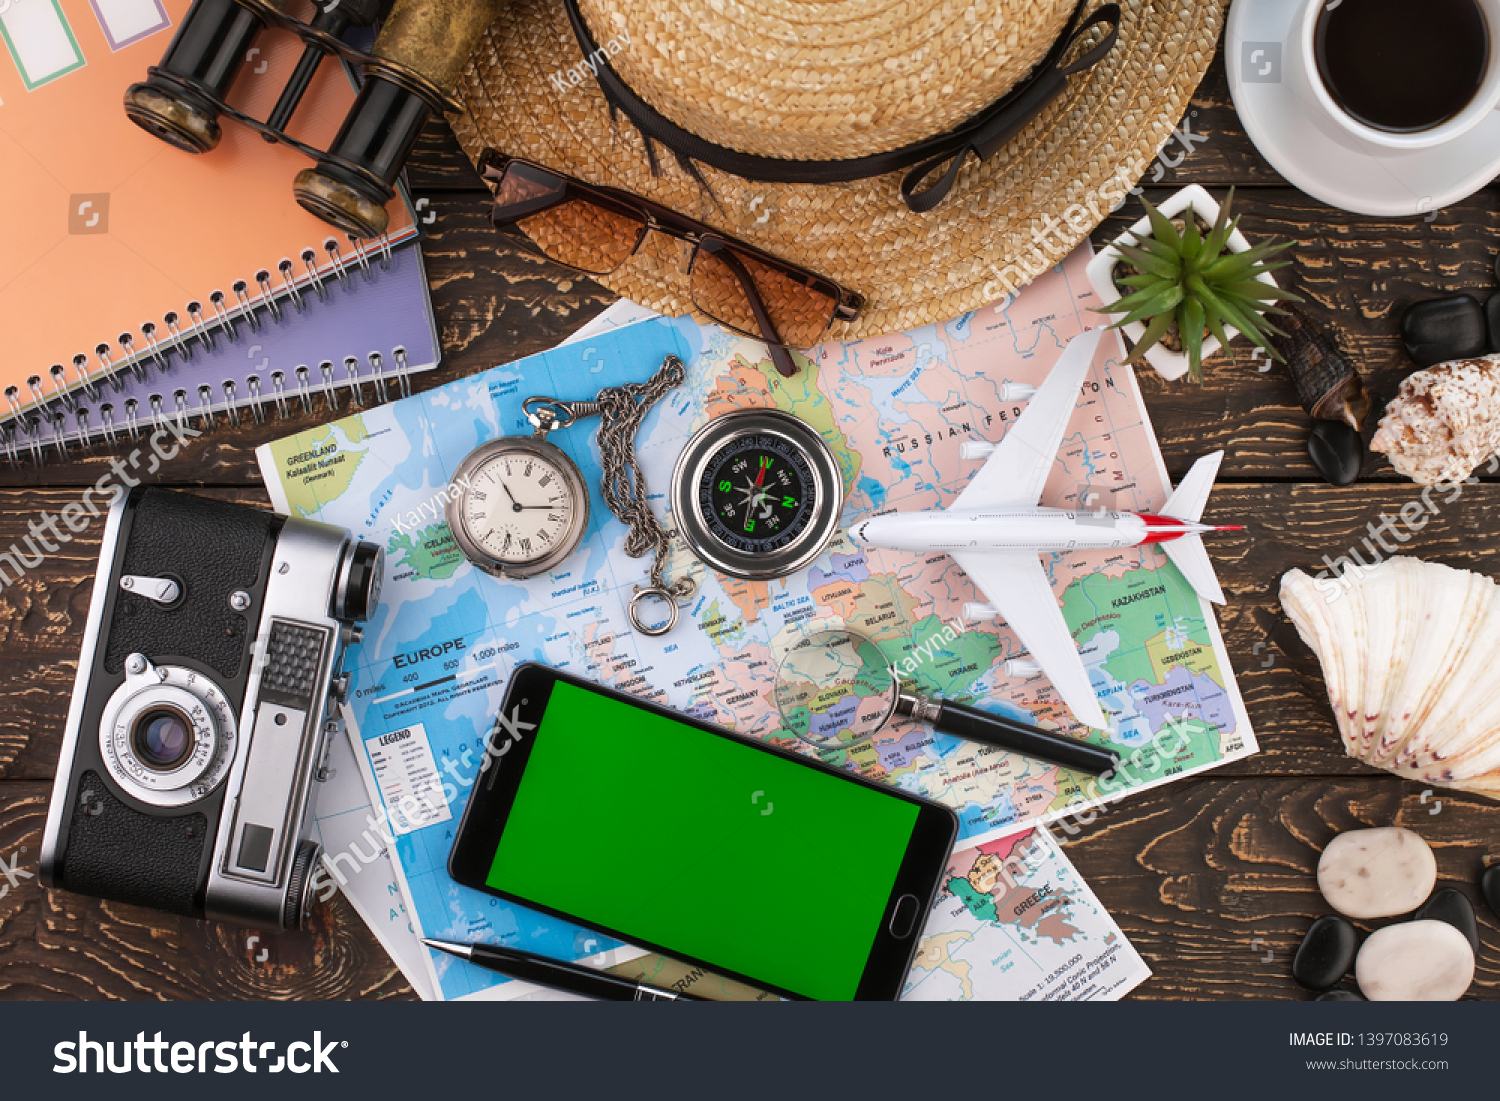 items and accessories for the traveler on the old background on the table #1397083619